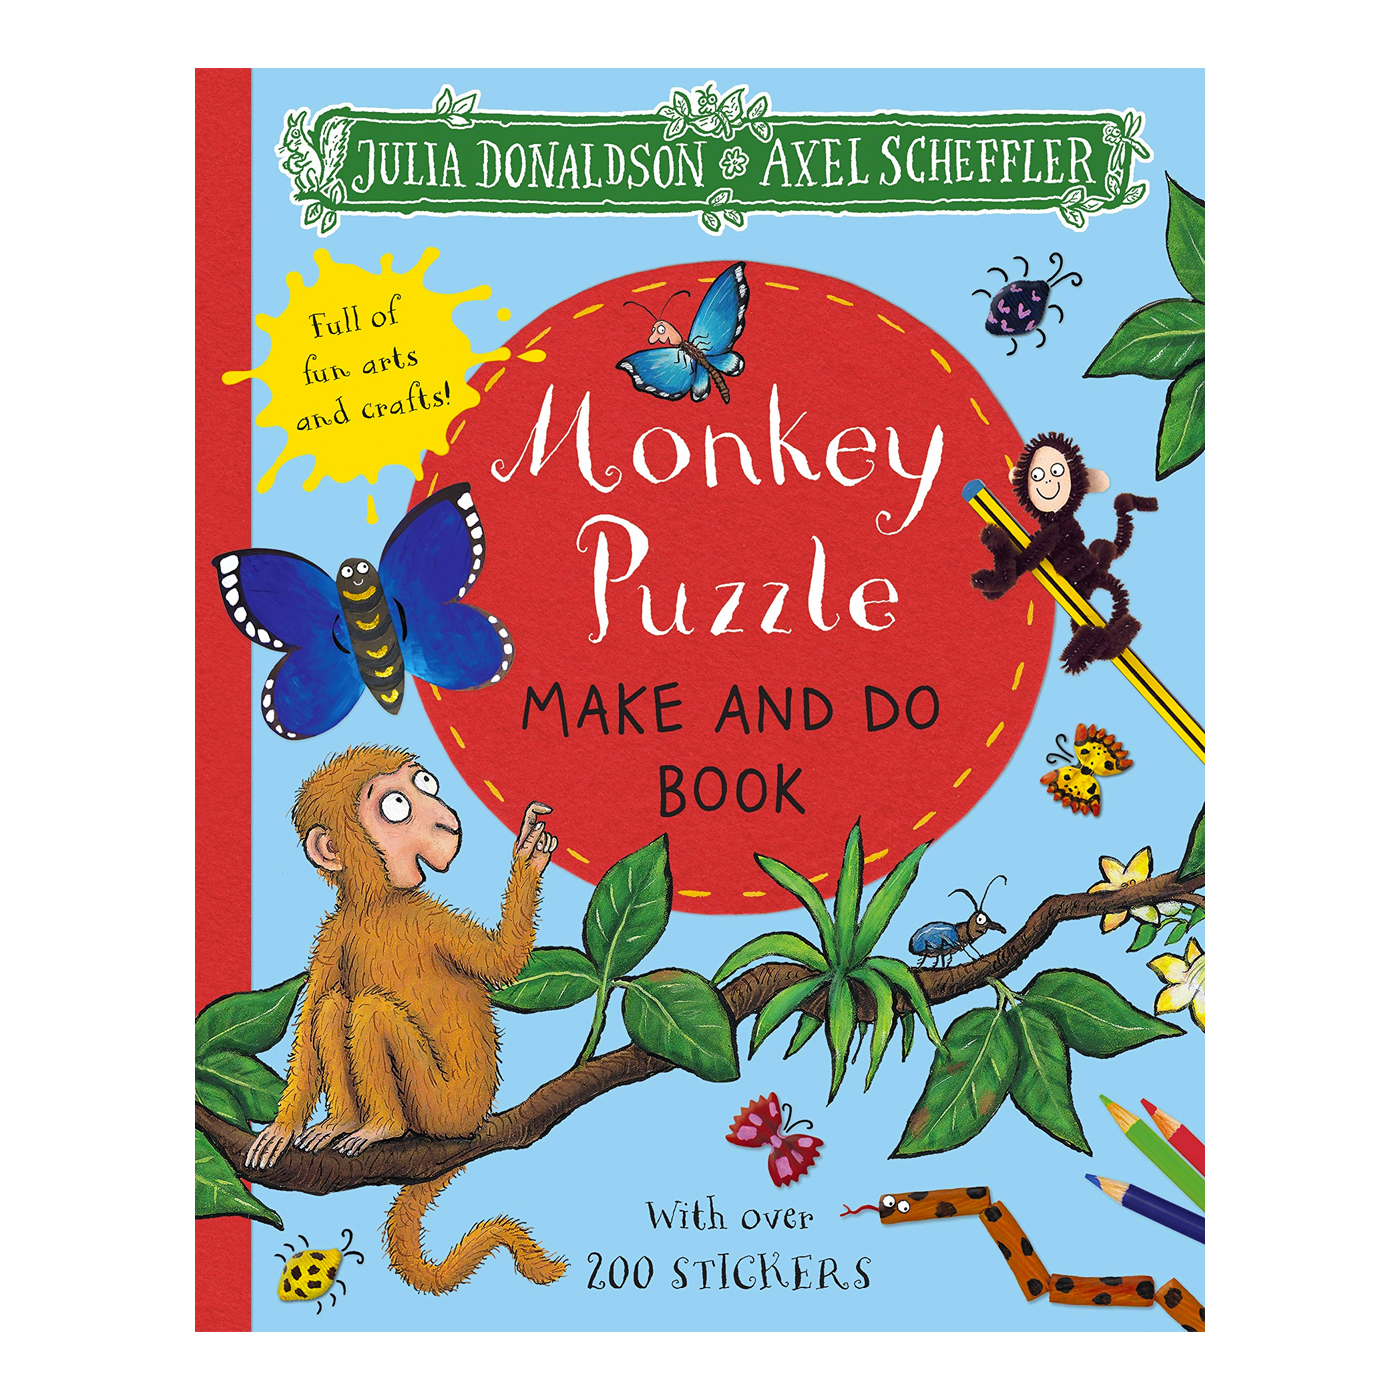  Monkey Puzzle Make and Do Book